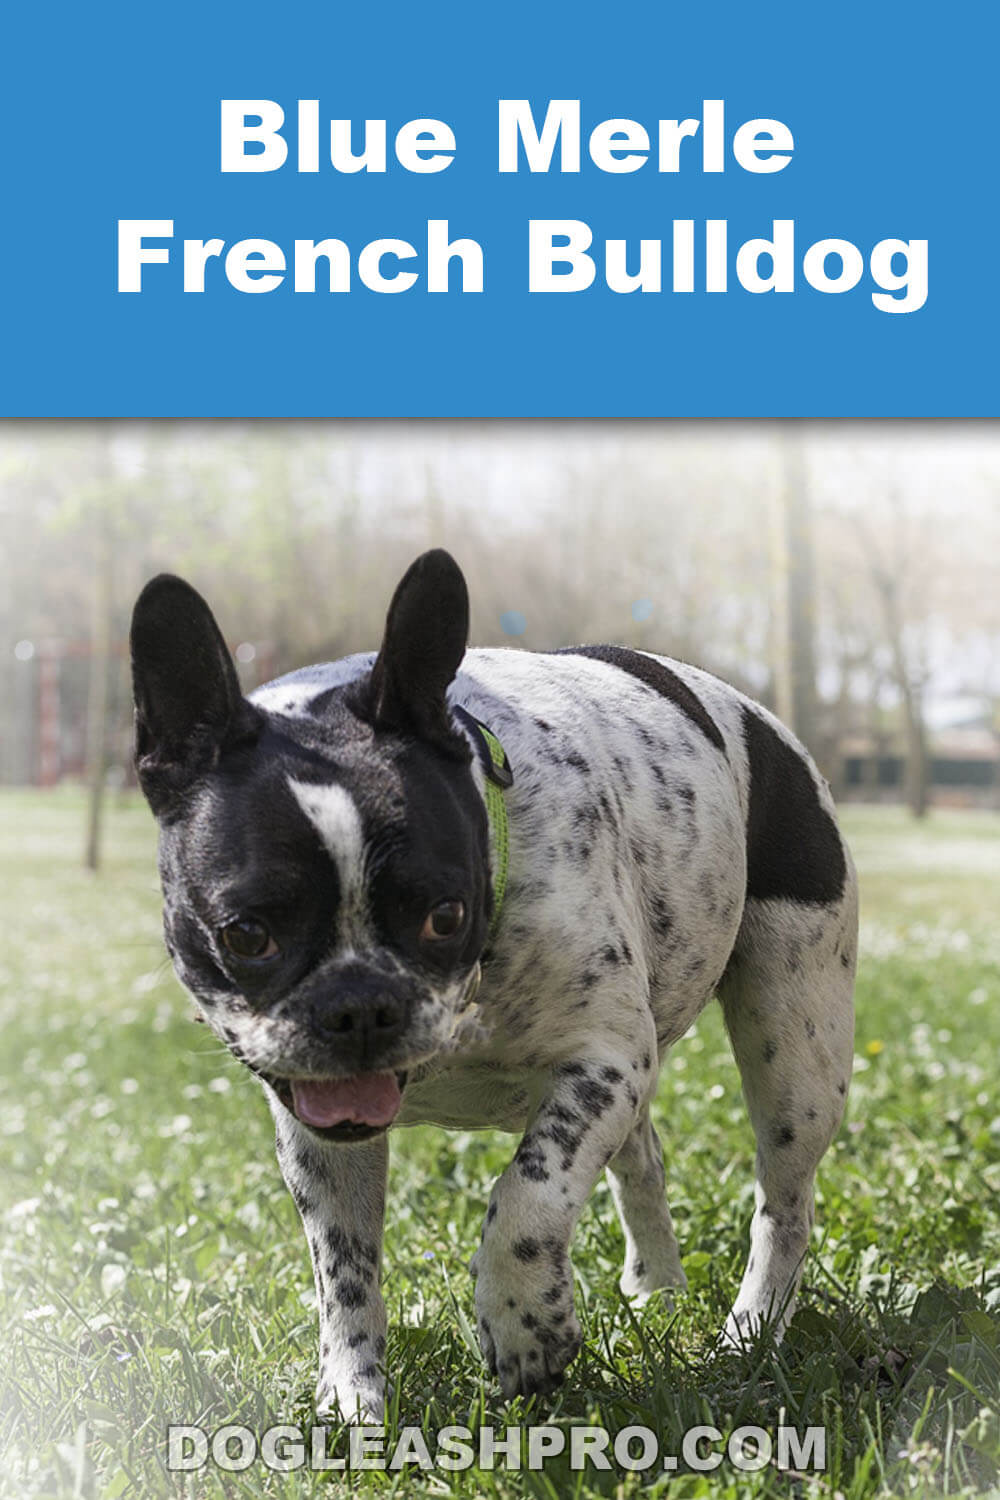 Blue Merle French Bulldog: Complete Guide